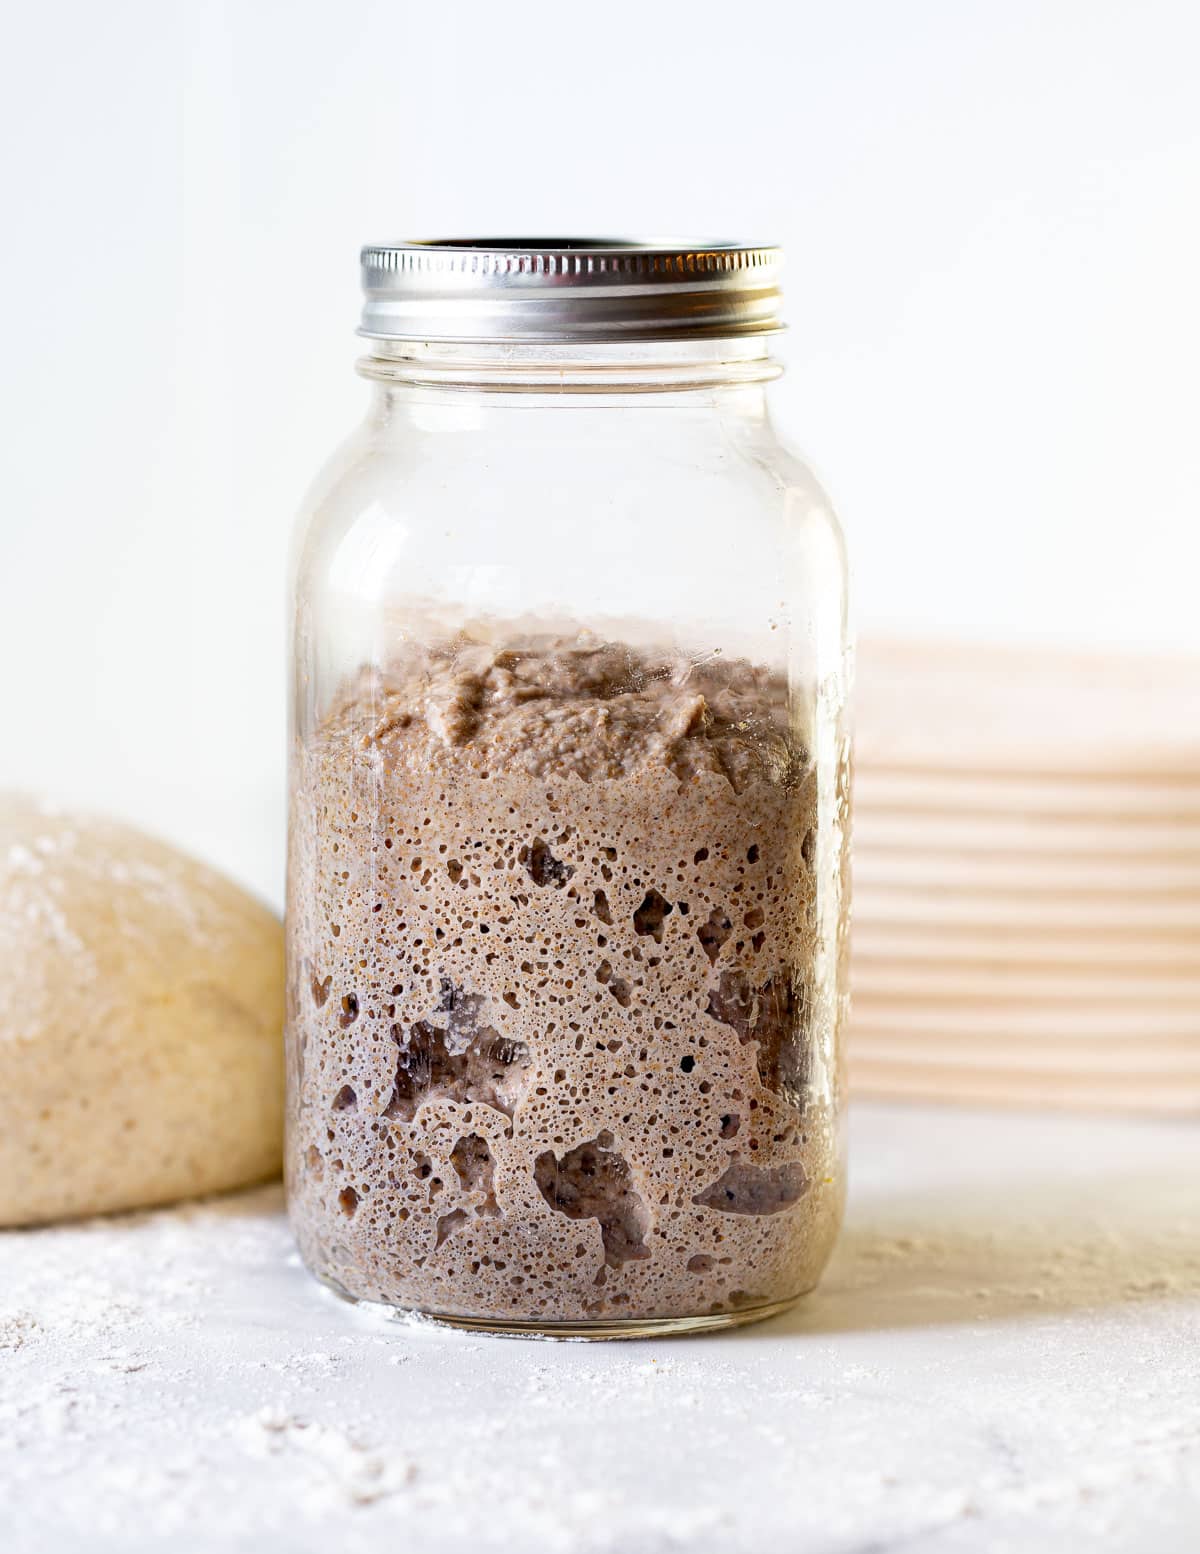 a jar of happy looking sourdough starter that's full of bubbles